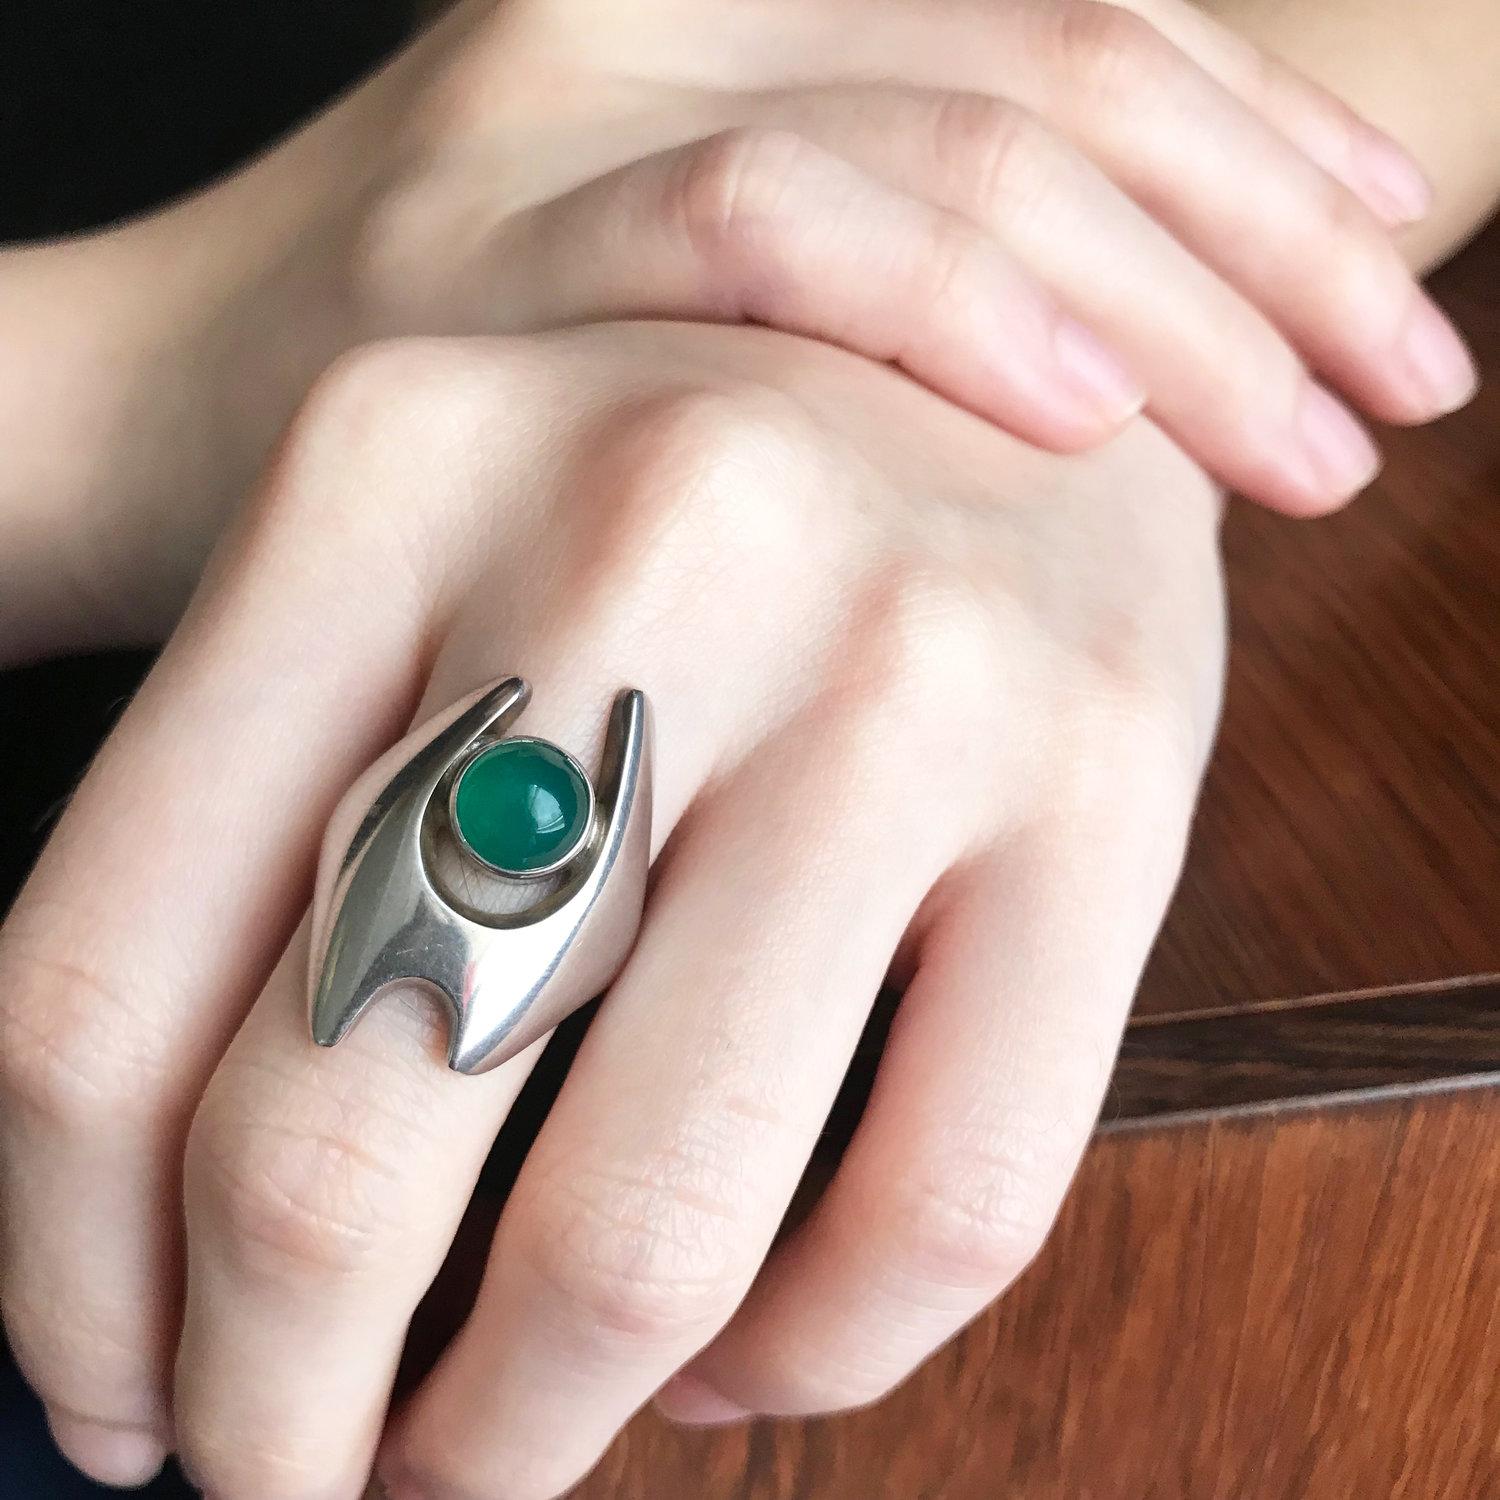 Georg Jensen Sterling Silver Ring by Henning Koppel No 139.
Bright Green Agate.  Size 8

Designer: Georg Jensen
Maker: Georg Jensen
Design #: 139
Circa: Post 1970
Dimensions: Size 8
Country of Origin: Denmark

Complimentary gift box included with